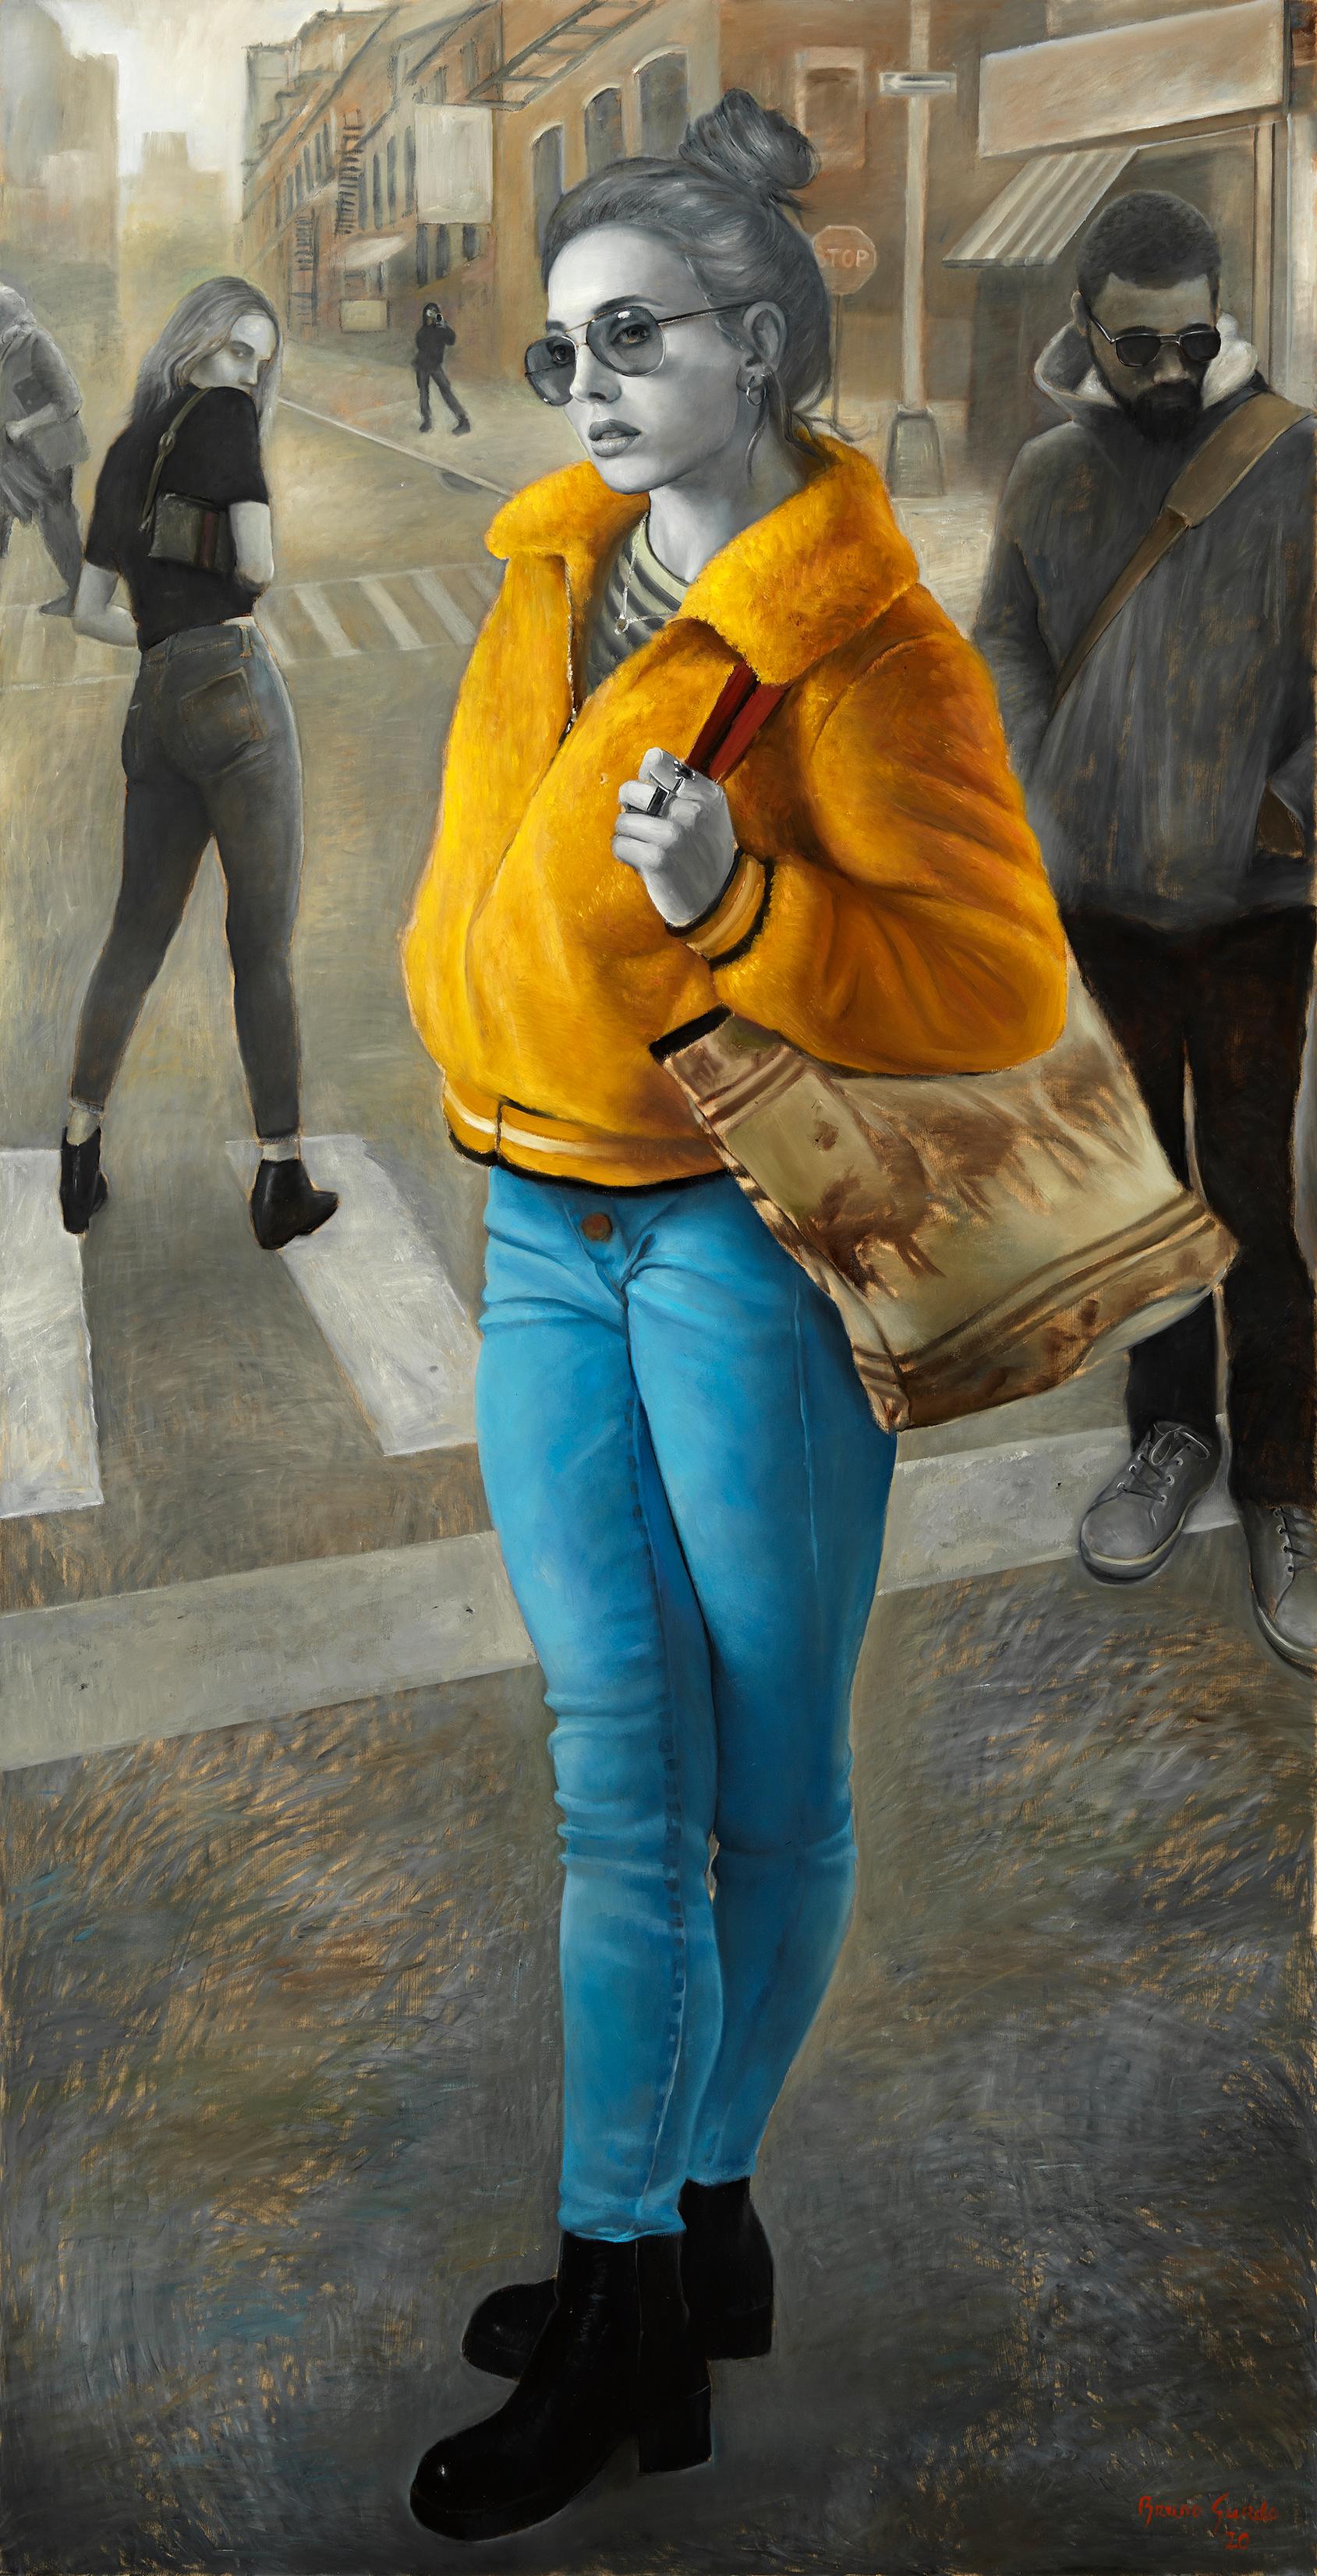 Bruno Surdo Figurative Painting - Separate Worlds of Reality, Woman Wearing a Bright Yellow Coat, Urban Setting